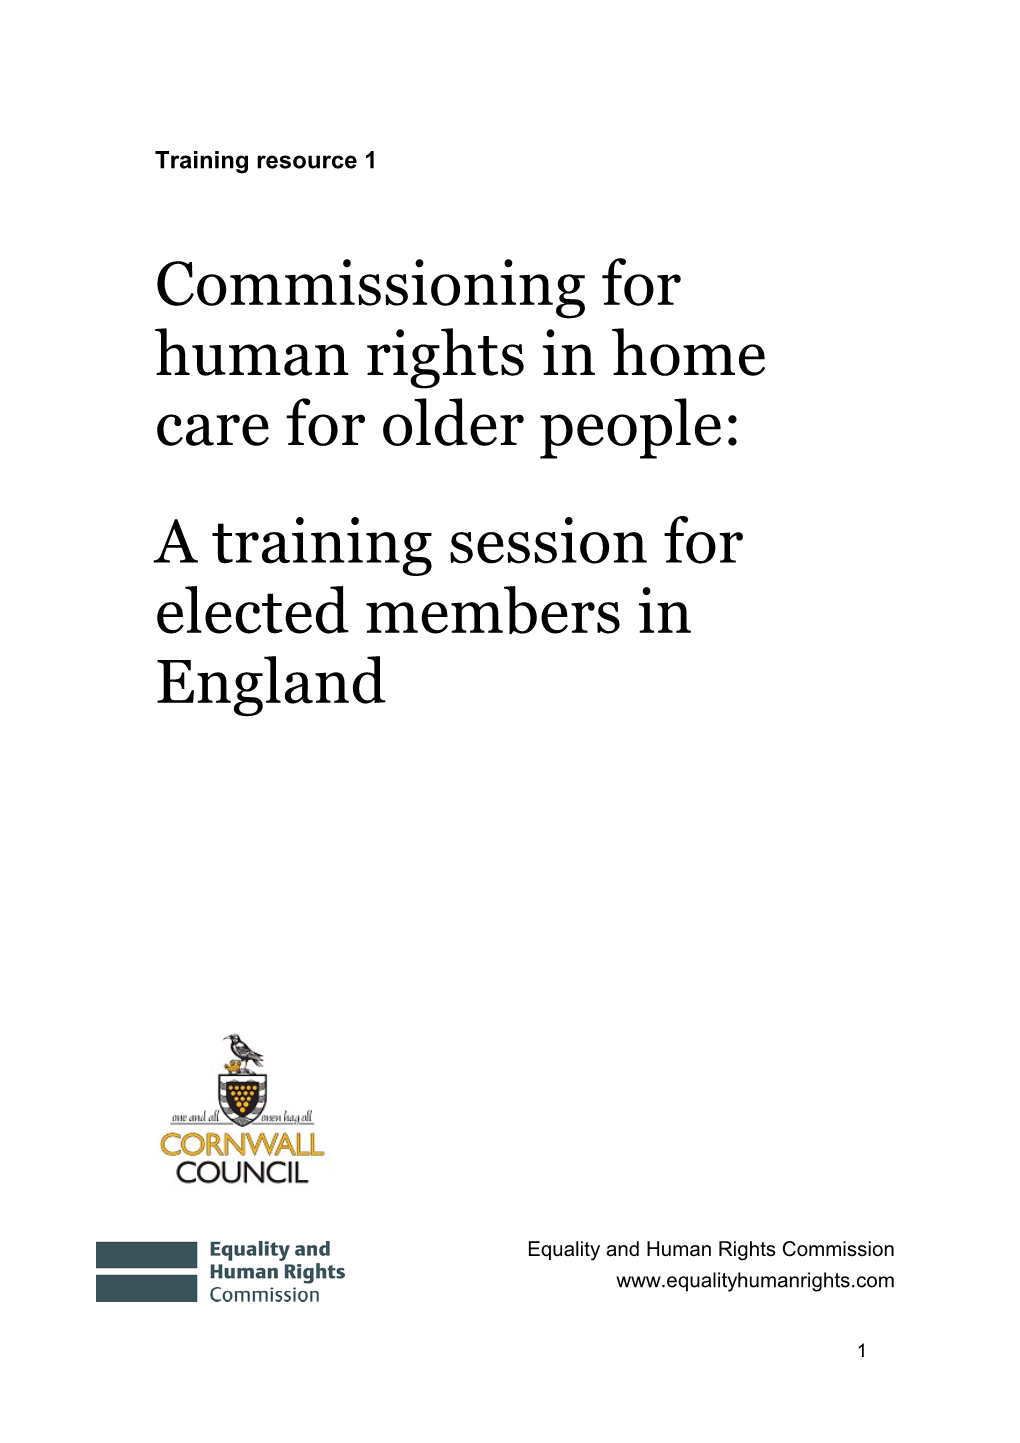 Commissioning for Human Rights in Homecare for Older People: Training Session